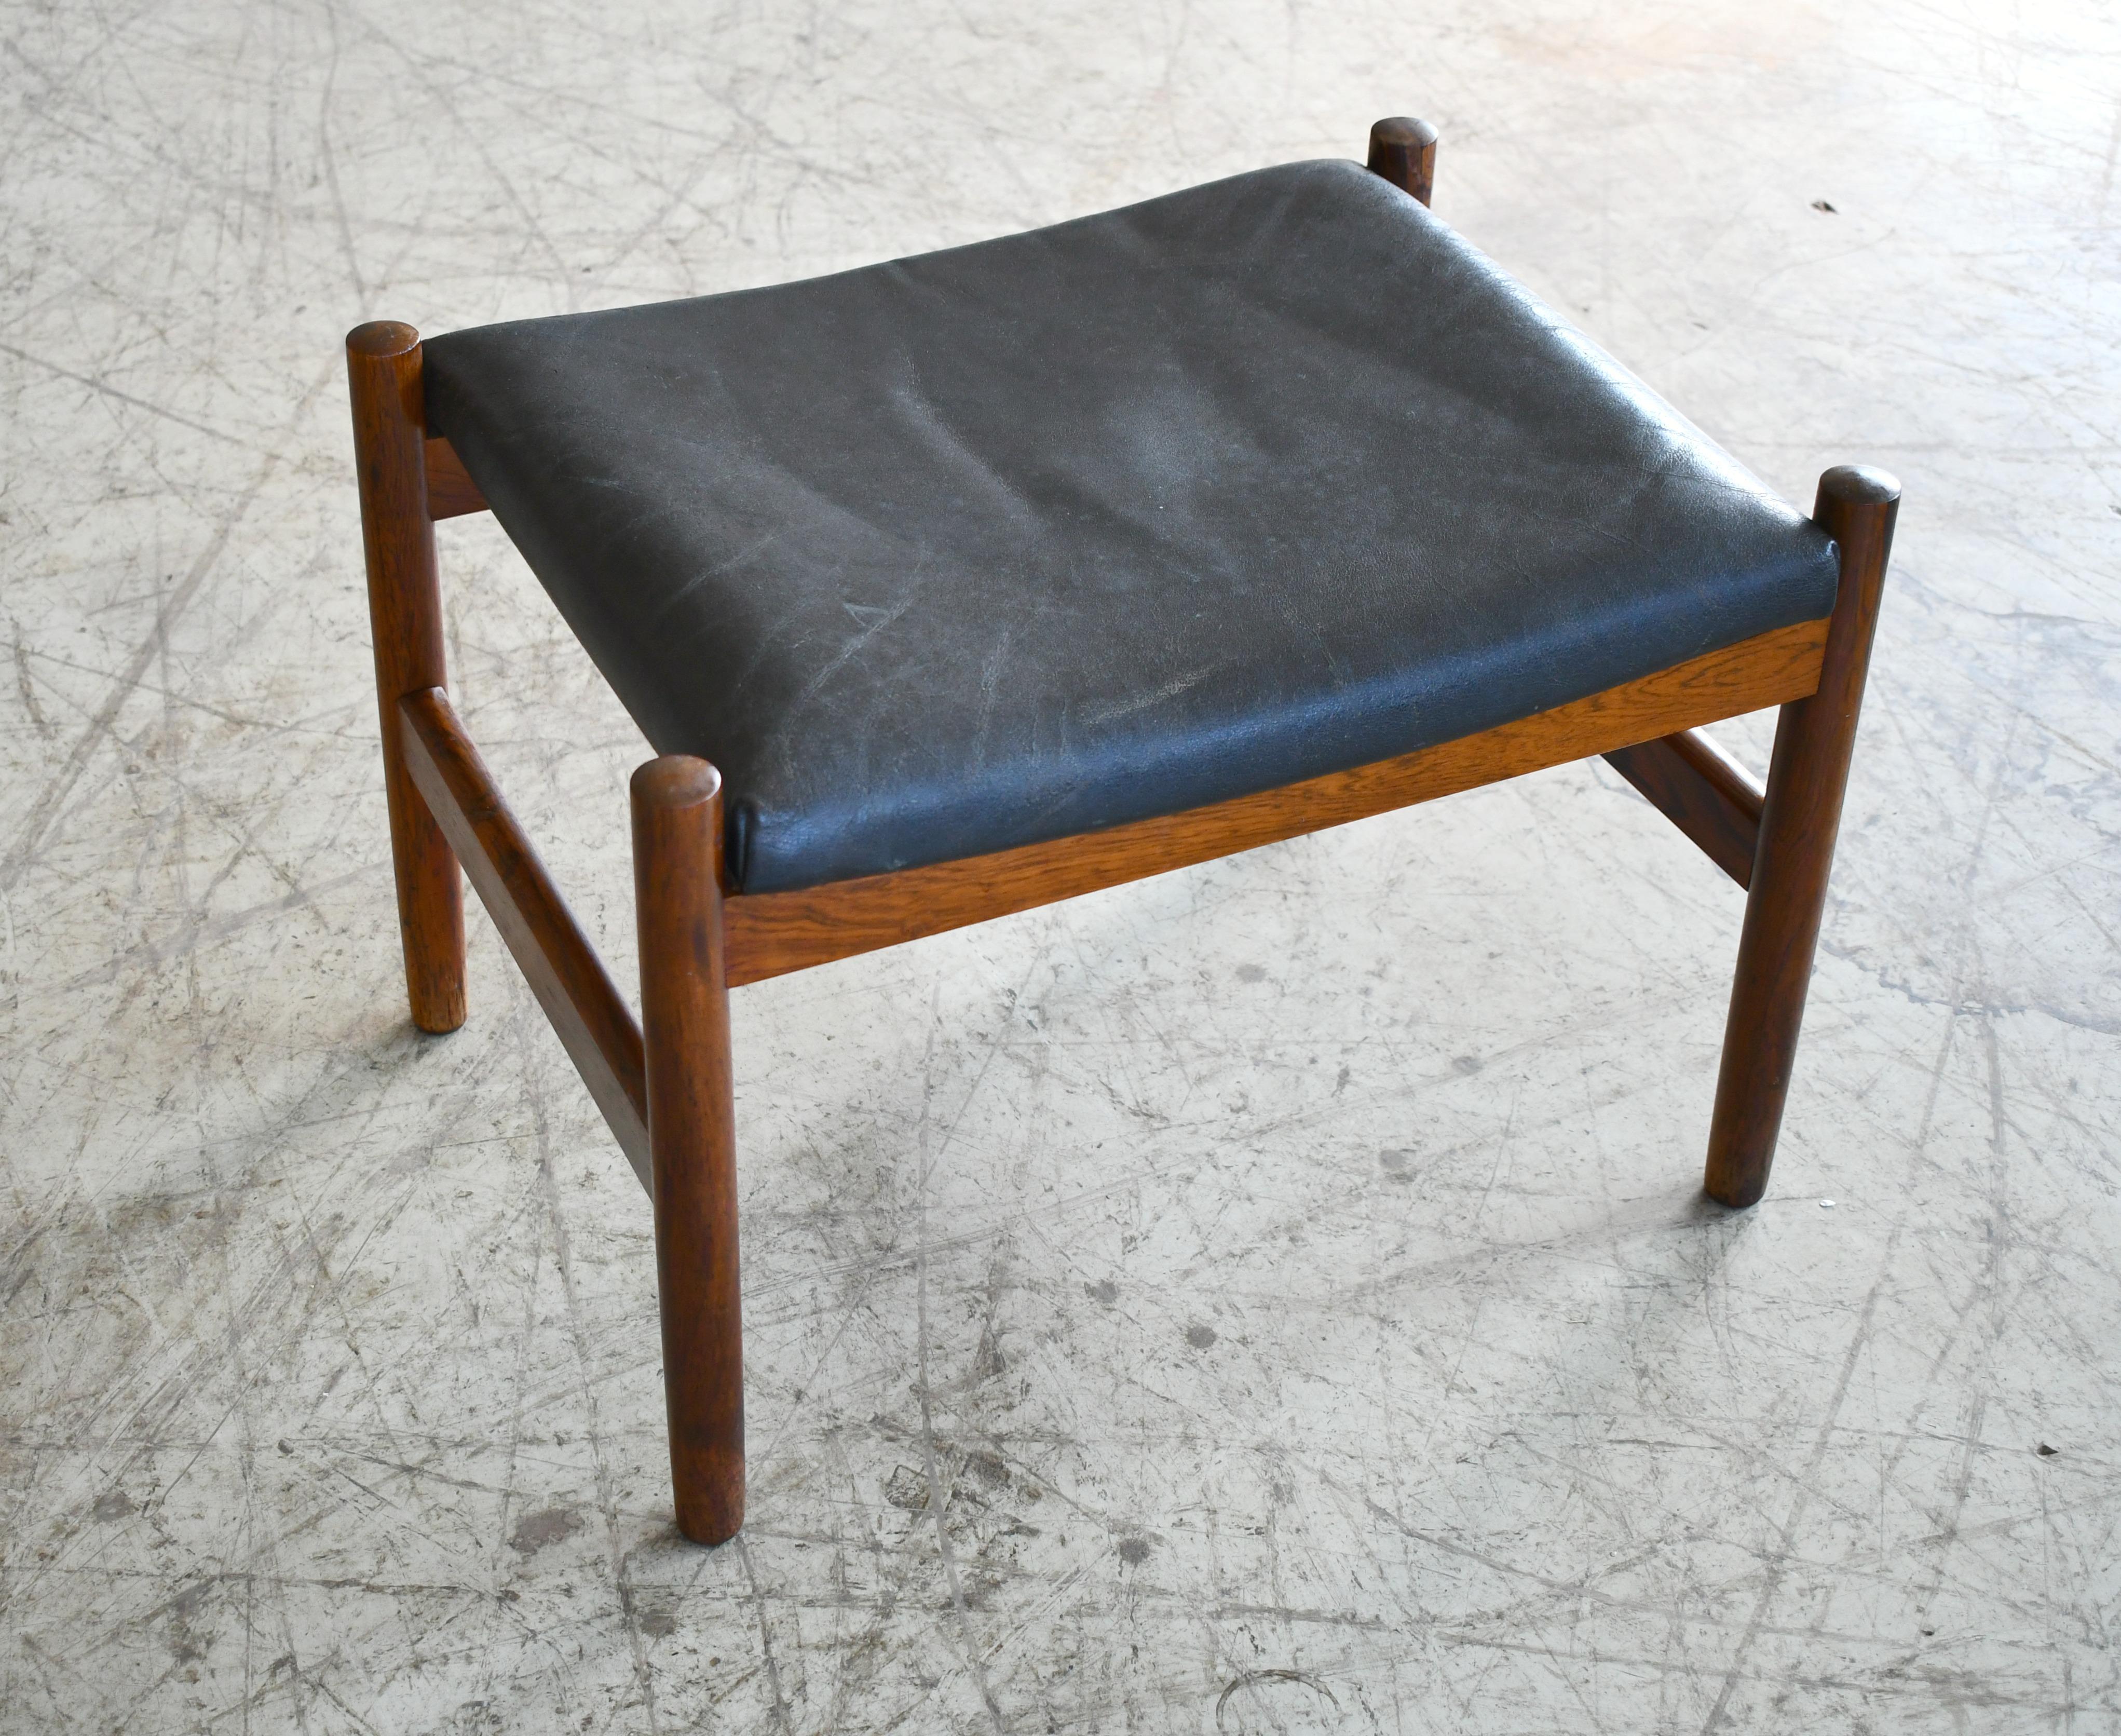 Spottrup's Classic and sought after ottoman featuring a solid rosewood frame with its original leather cushion in black well worn patinated leather. A great Danish midcentury design that could be paired with a chair as an ottoman or used alone as a